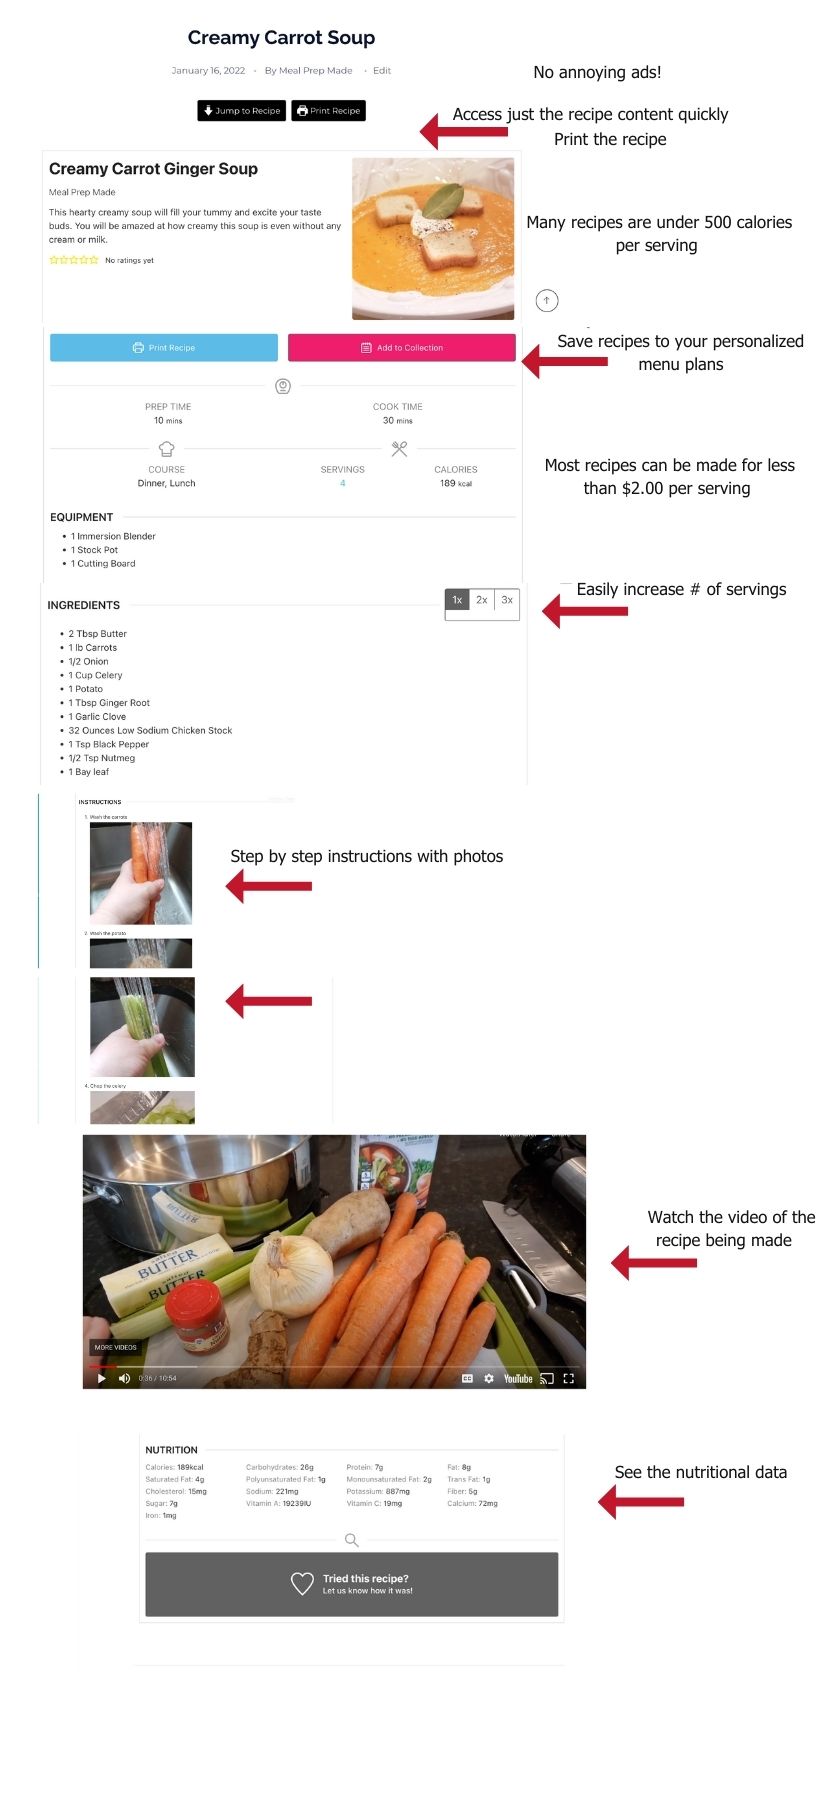 Ability to access the recipe content and print it (3)